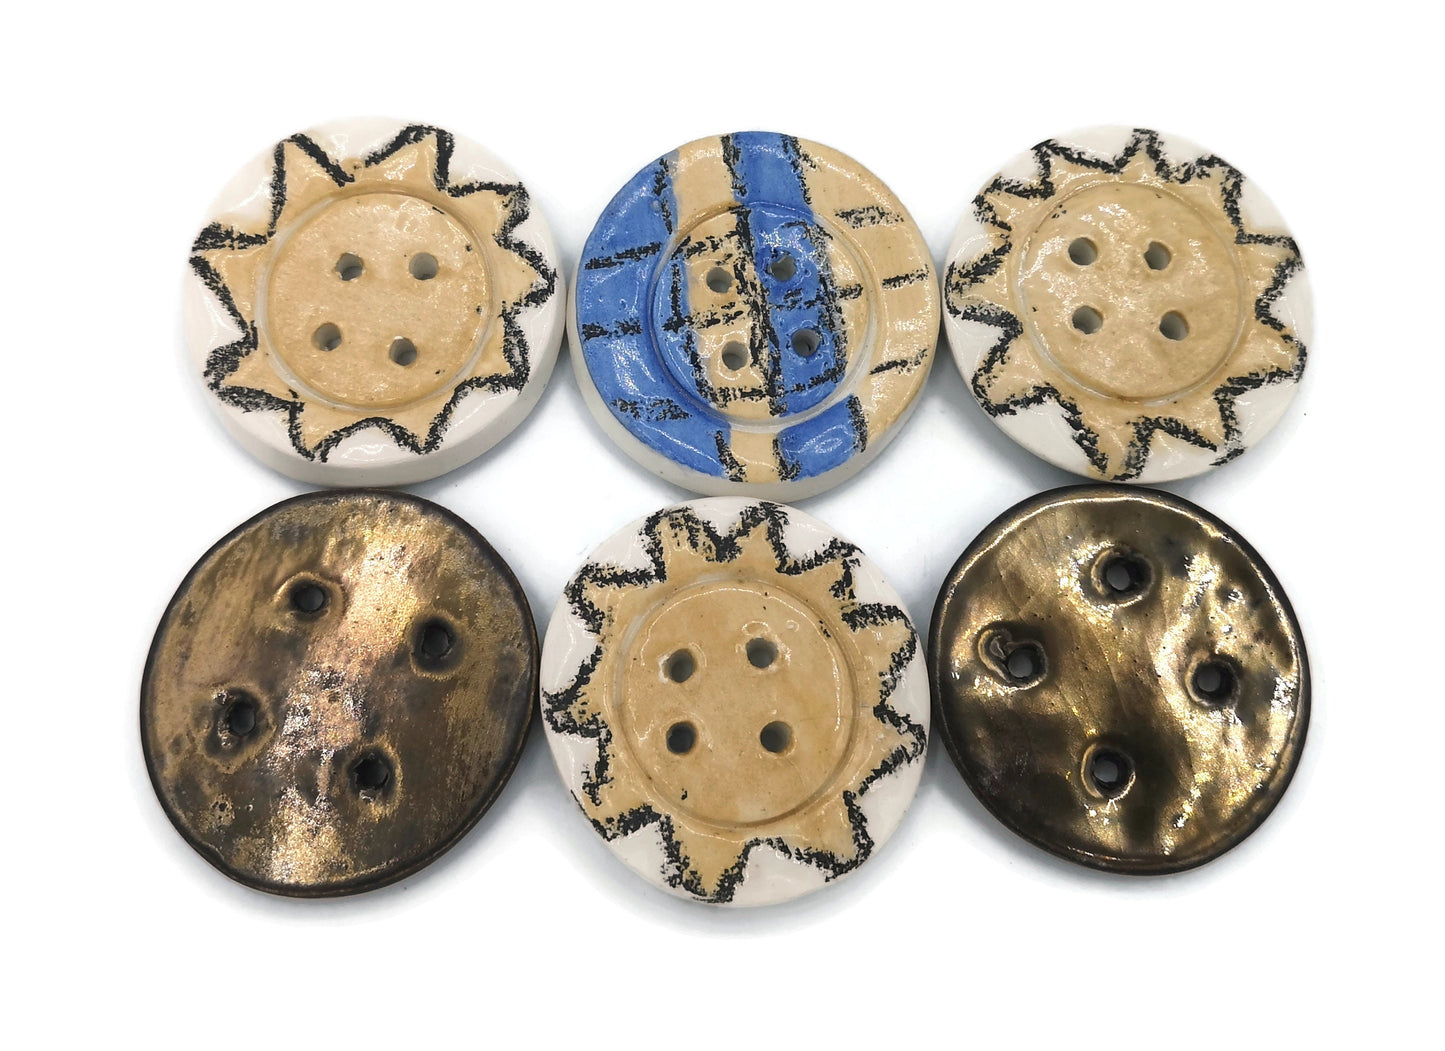 Set Of 6 Hand Painted Flat Buttons, Sun Buttons Sewing Supplies And Notions, Handmade Ceramic Strange And Unusual Metal Buttons - Ceramica Ana Rafael